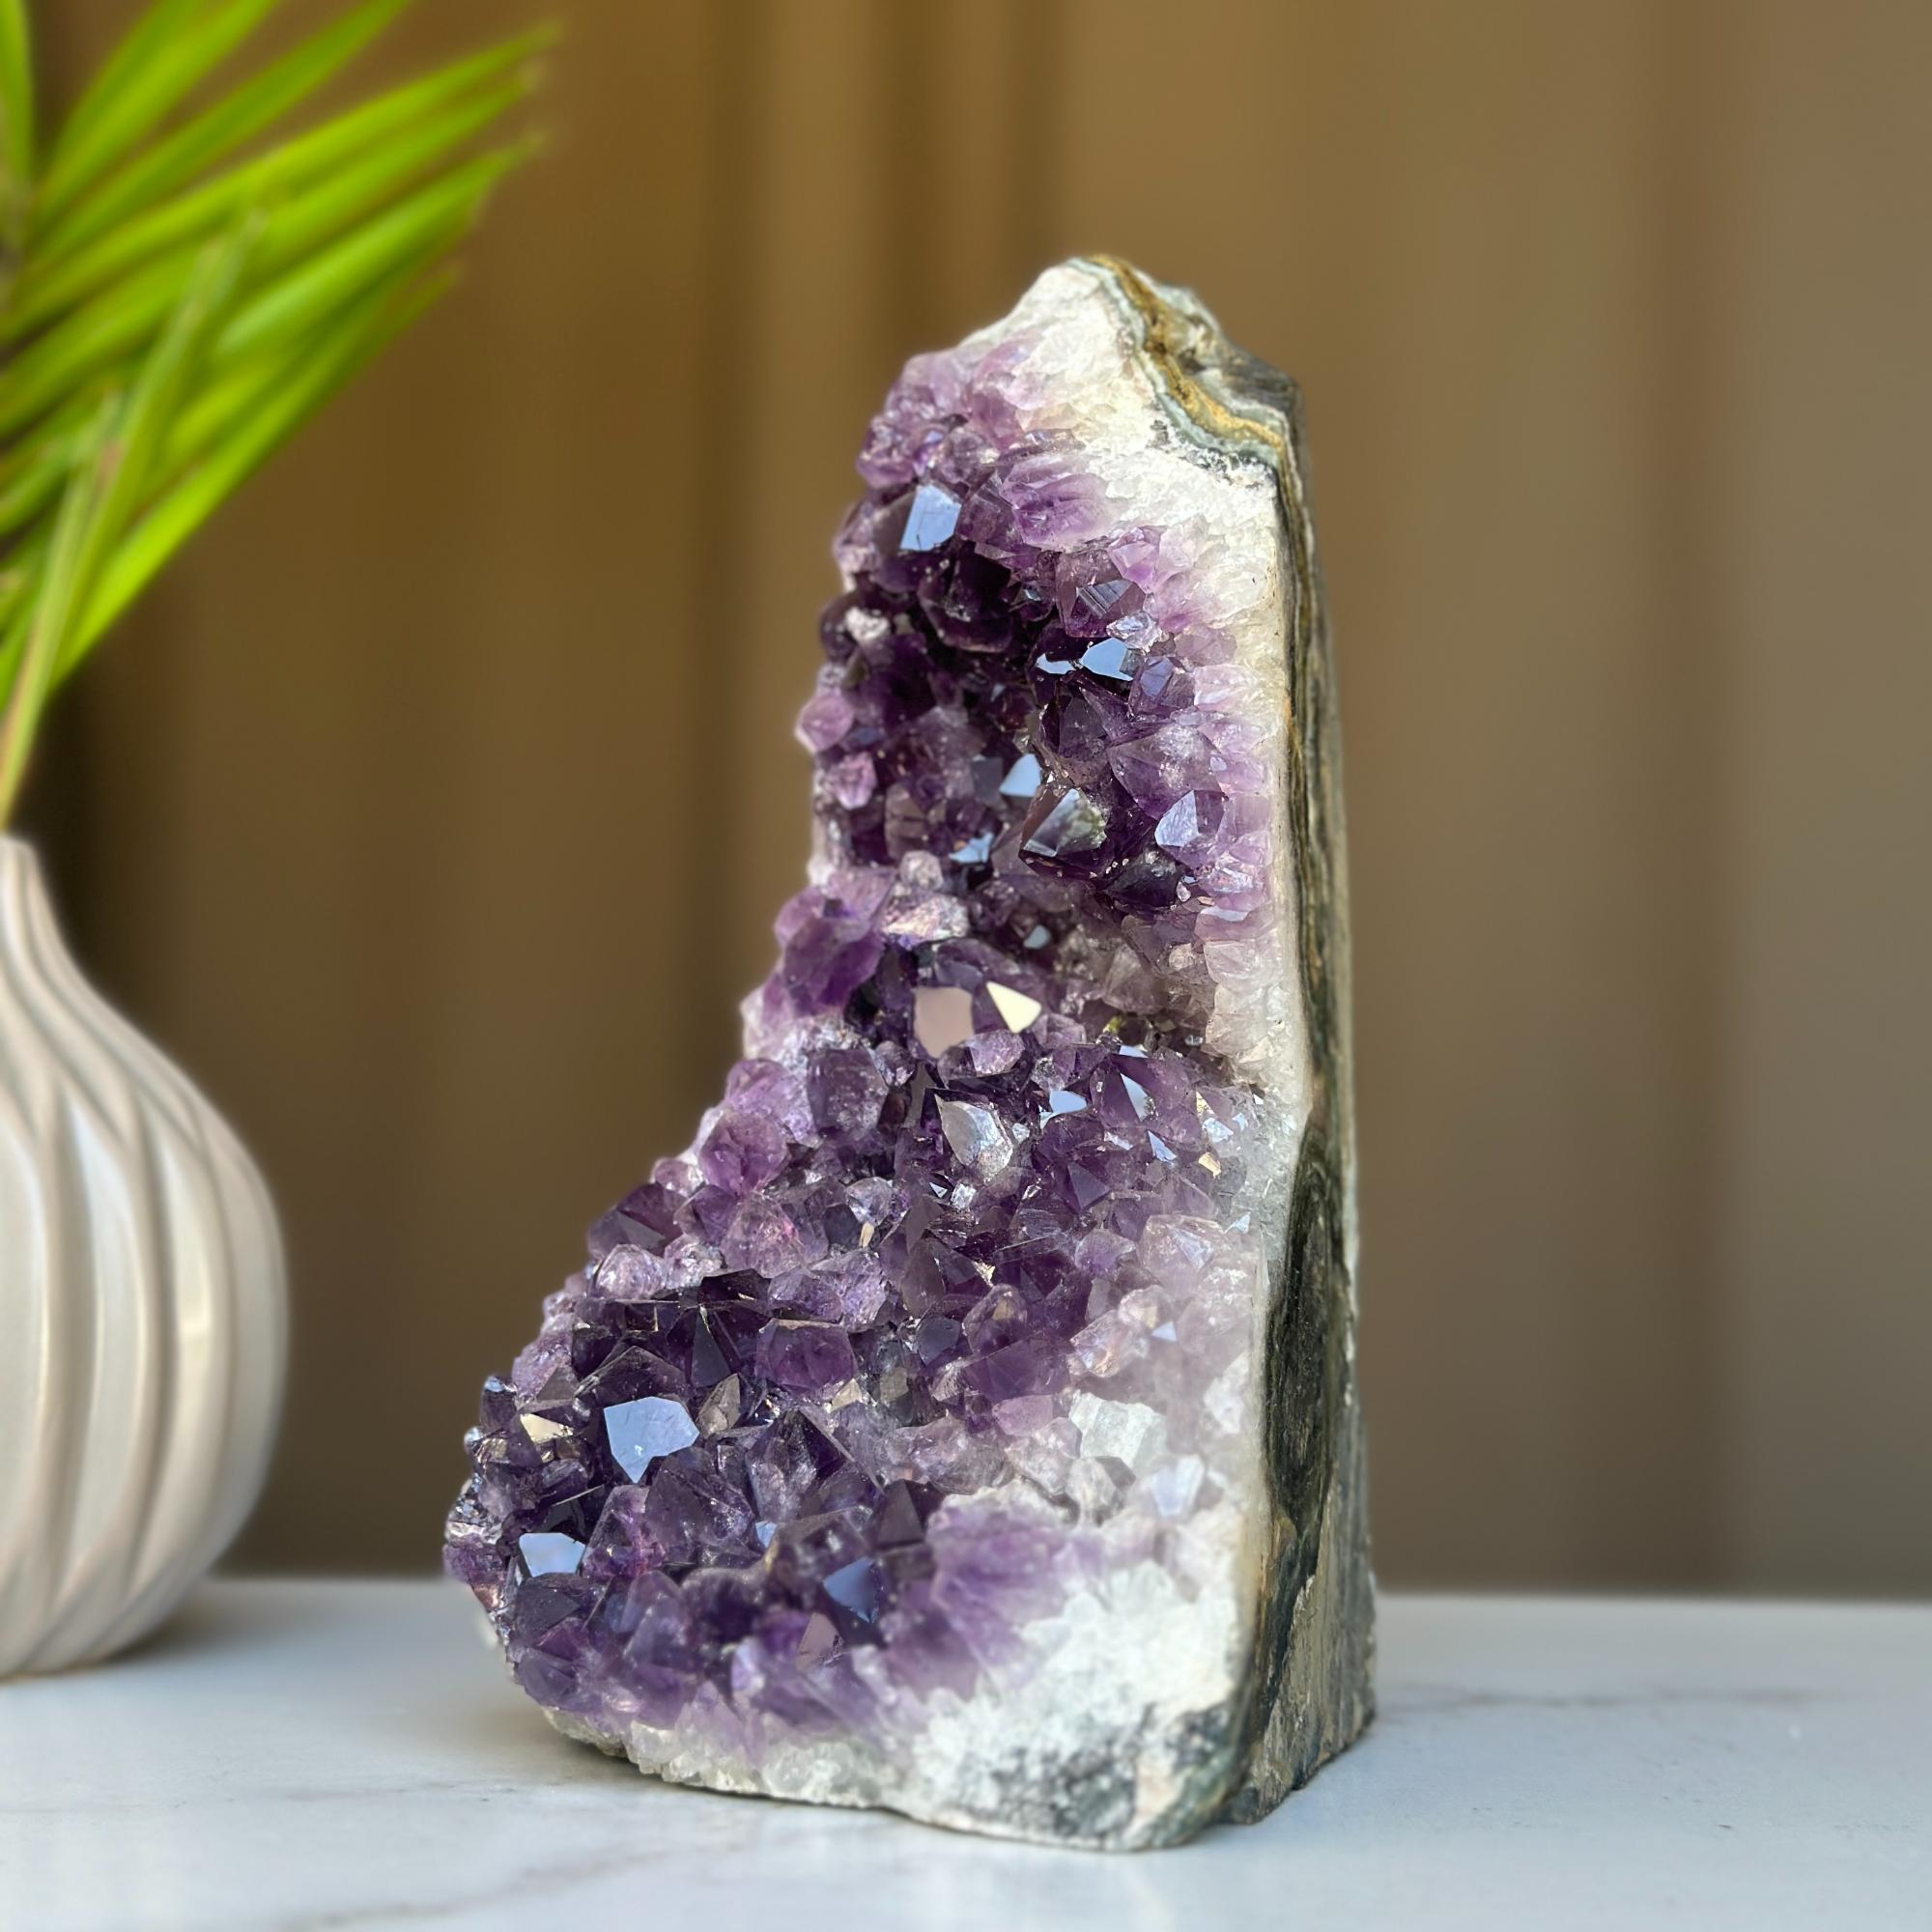 4 Lb Amethyst Cave Geode, 8 in tall Huge Crystal Cluster for Collectors